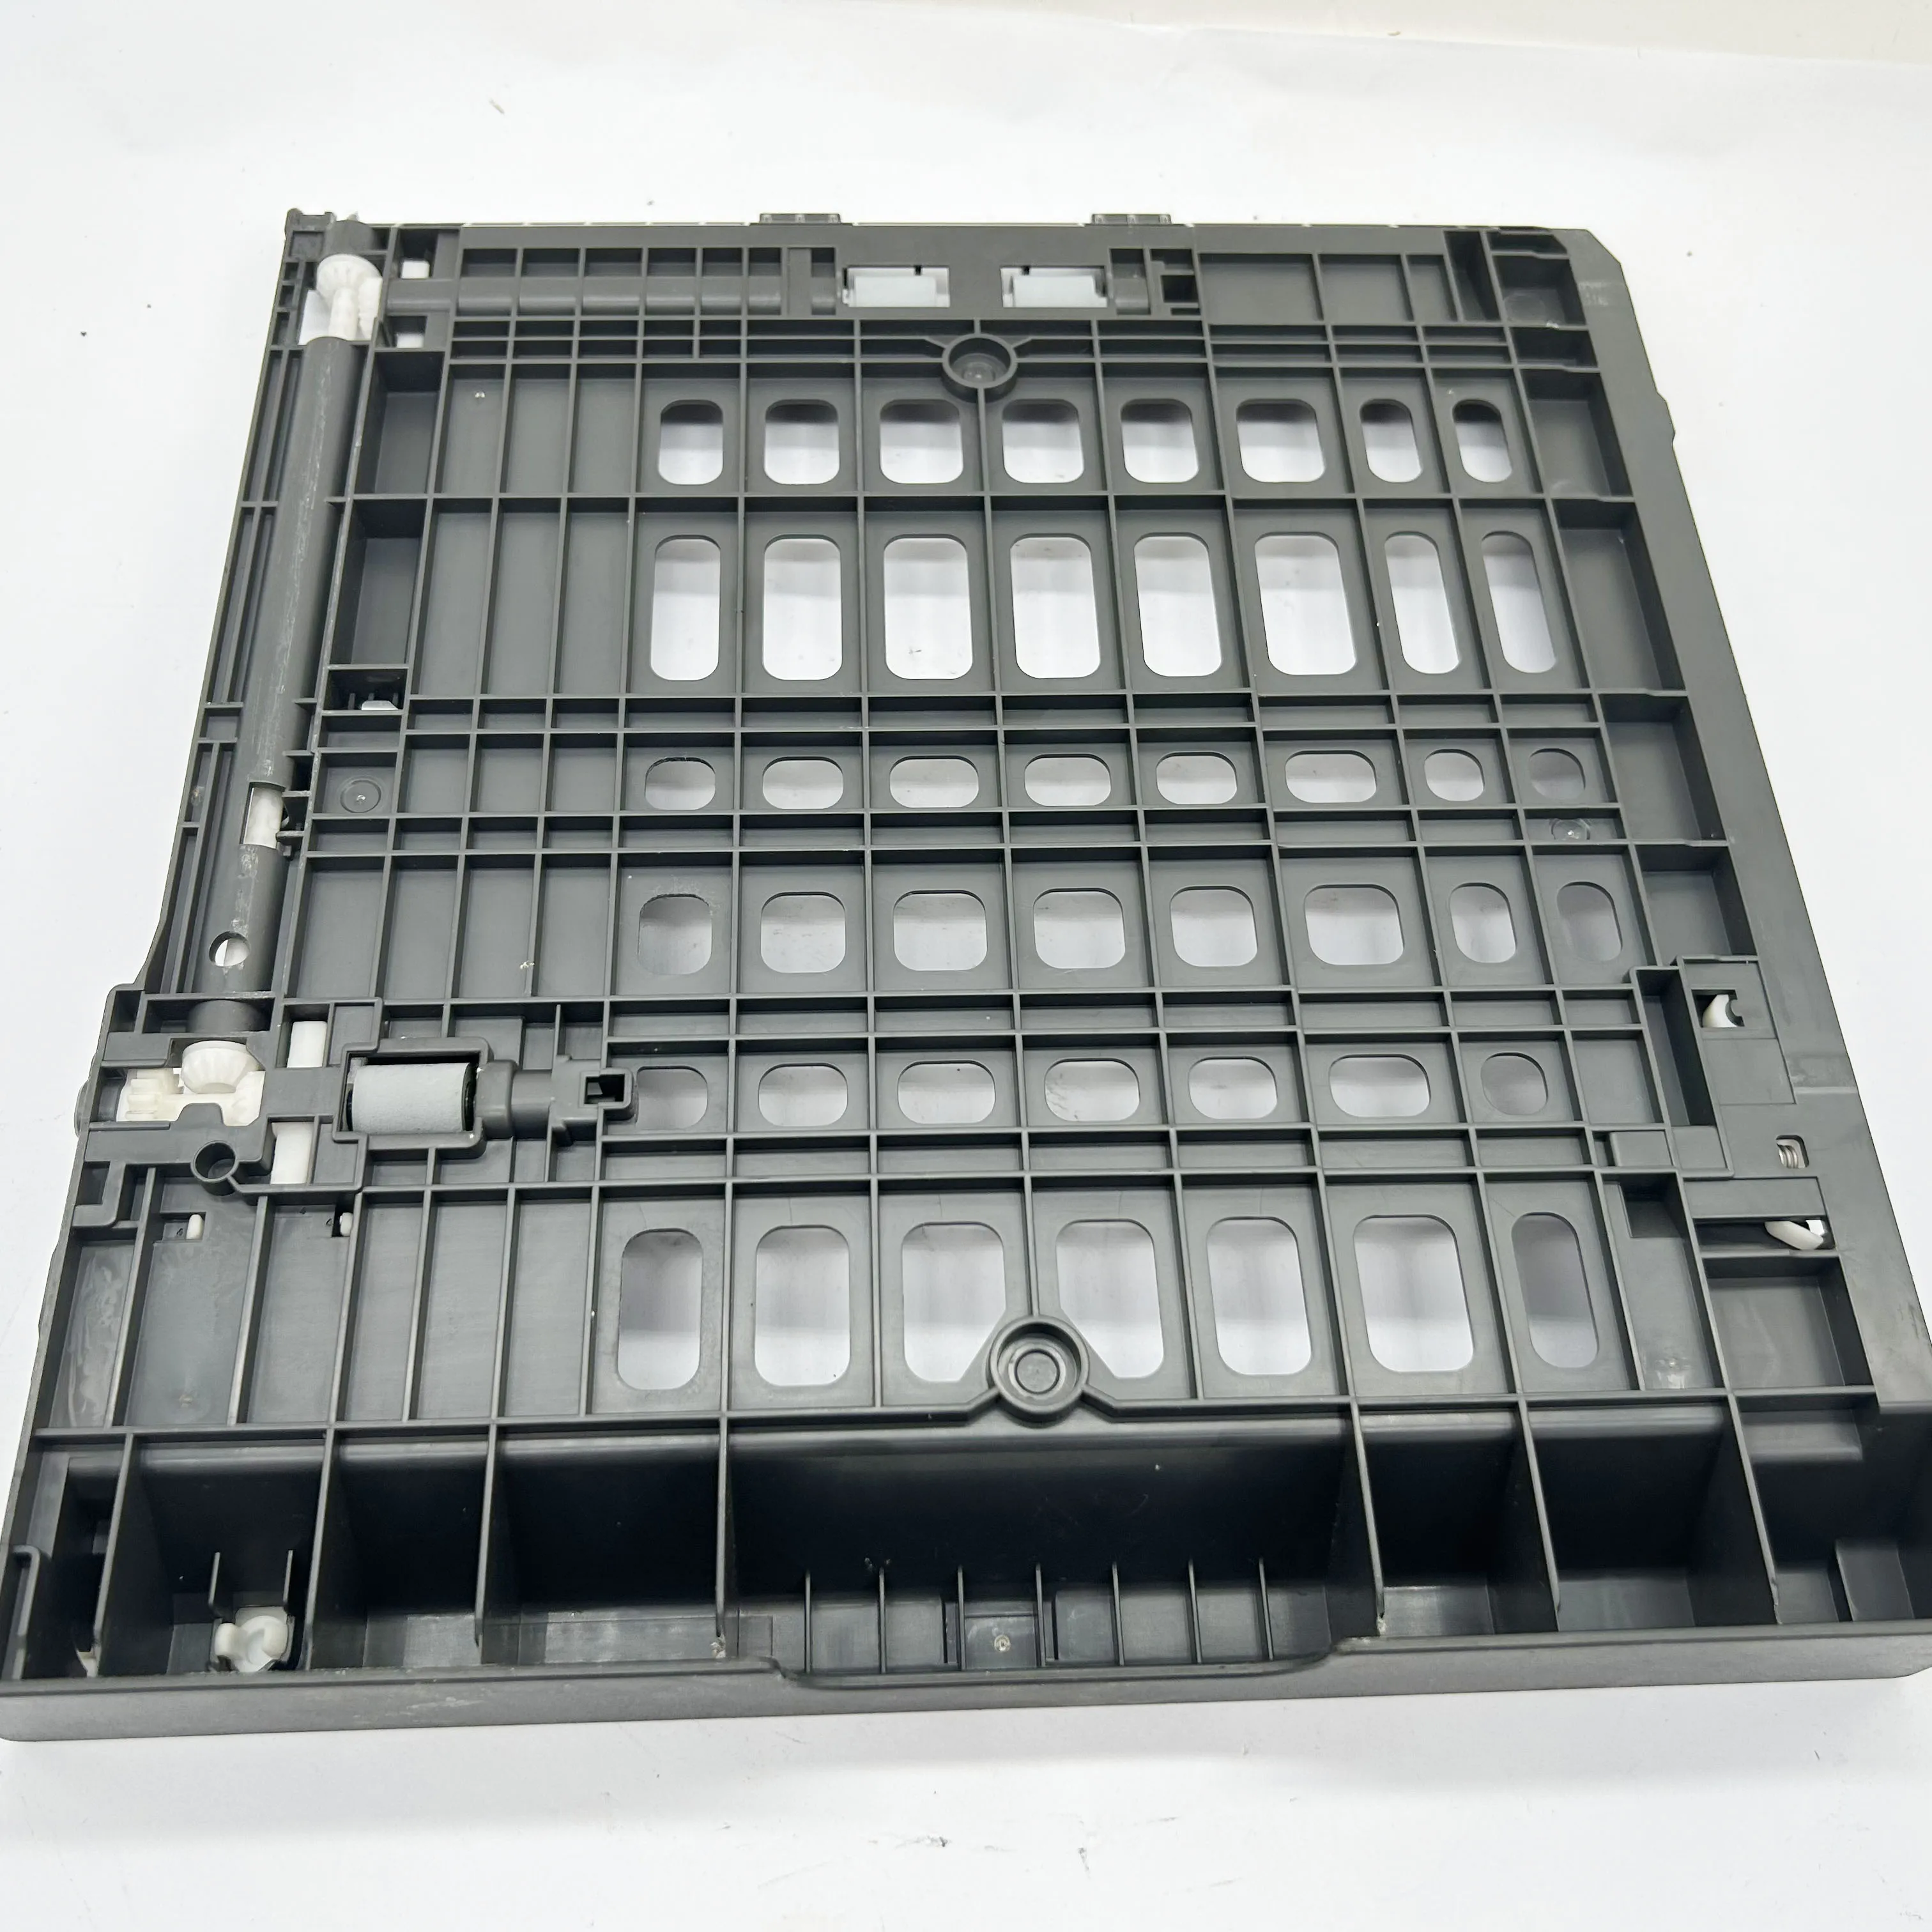 

Pickup Roller Tray Fits For Brother NETWORK 8515DN MFC-8515DN 8515